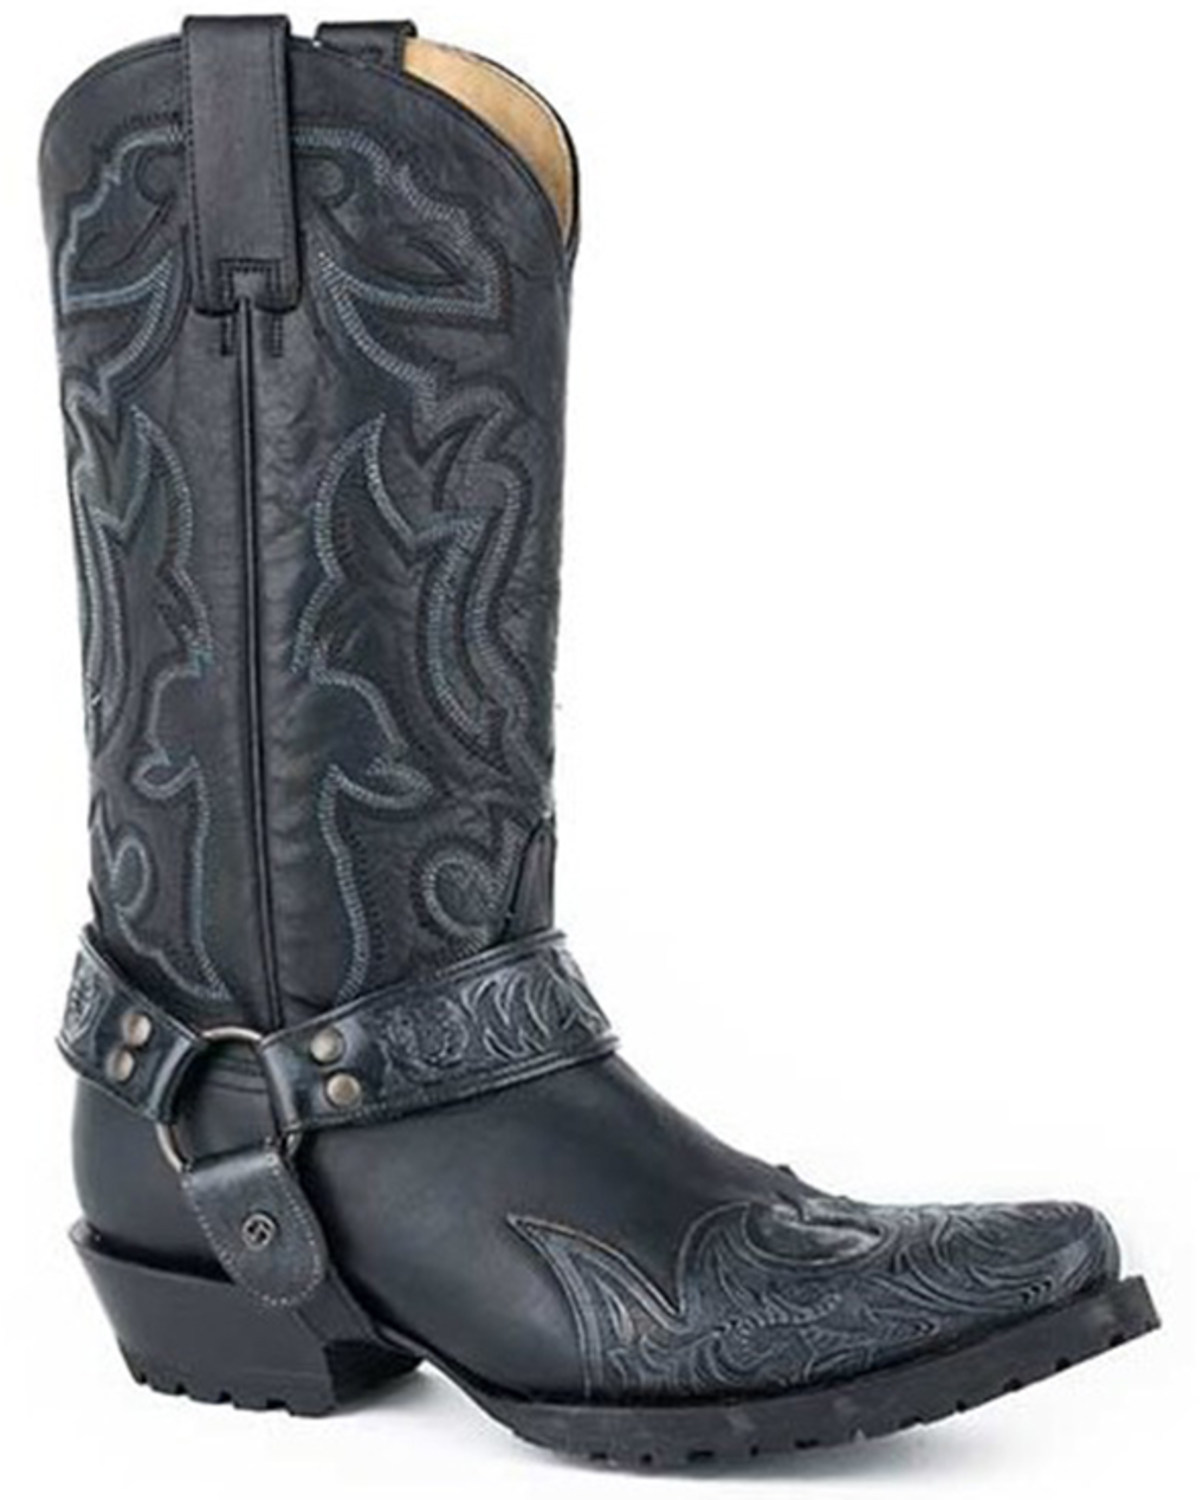 Stetson Men's Outlaw Sciver Biker Tooled Performance Western Boots - Snip Toe